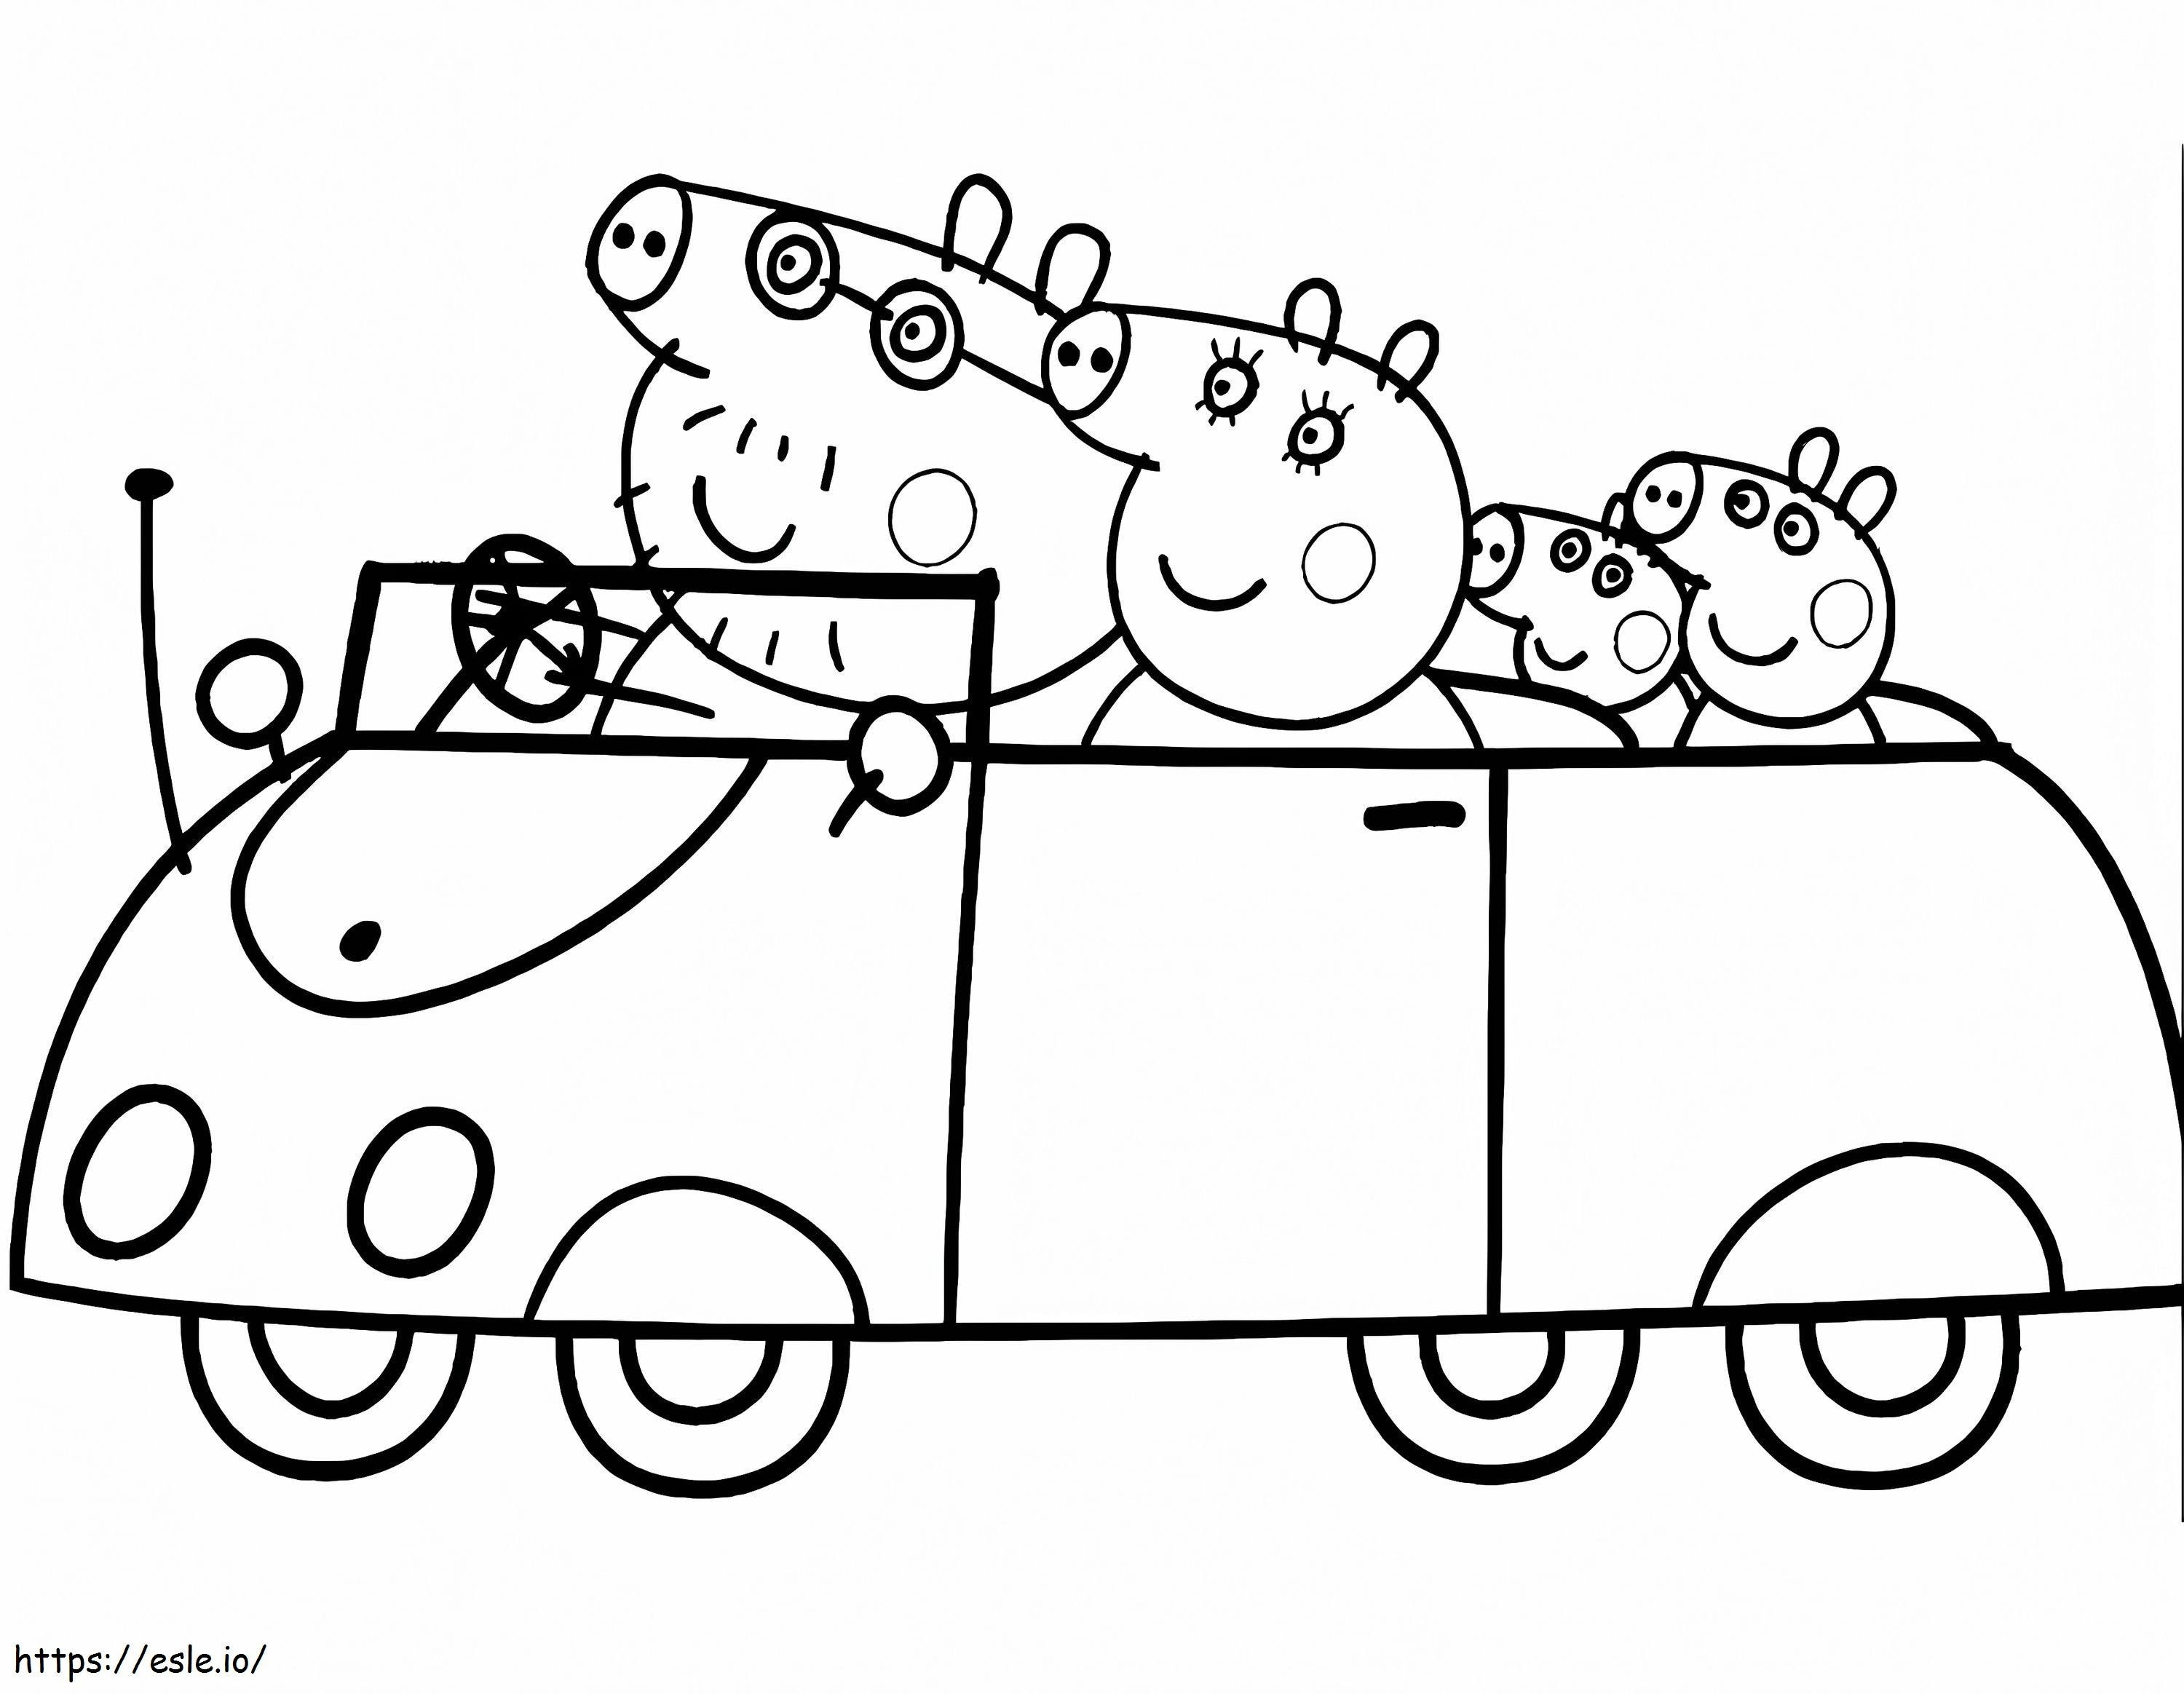 The Peppa Pig Family coloring page